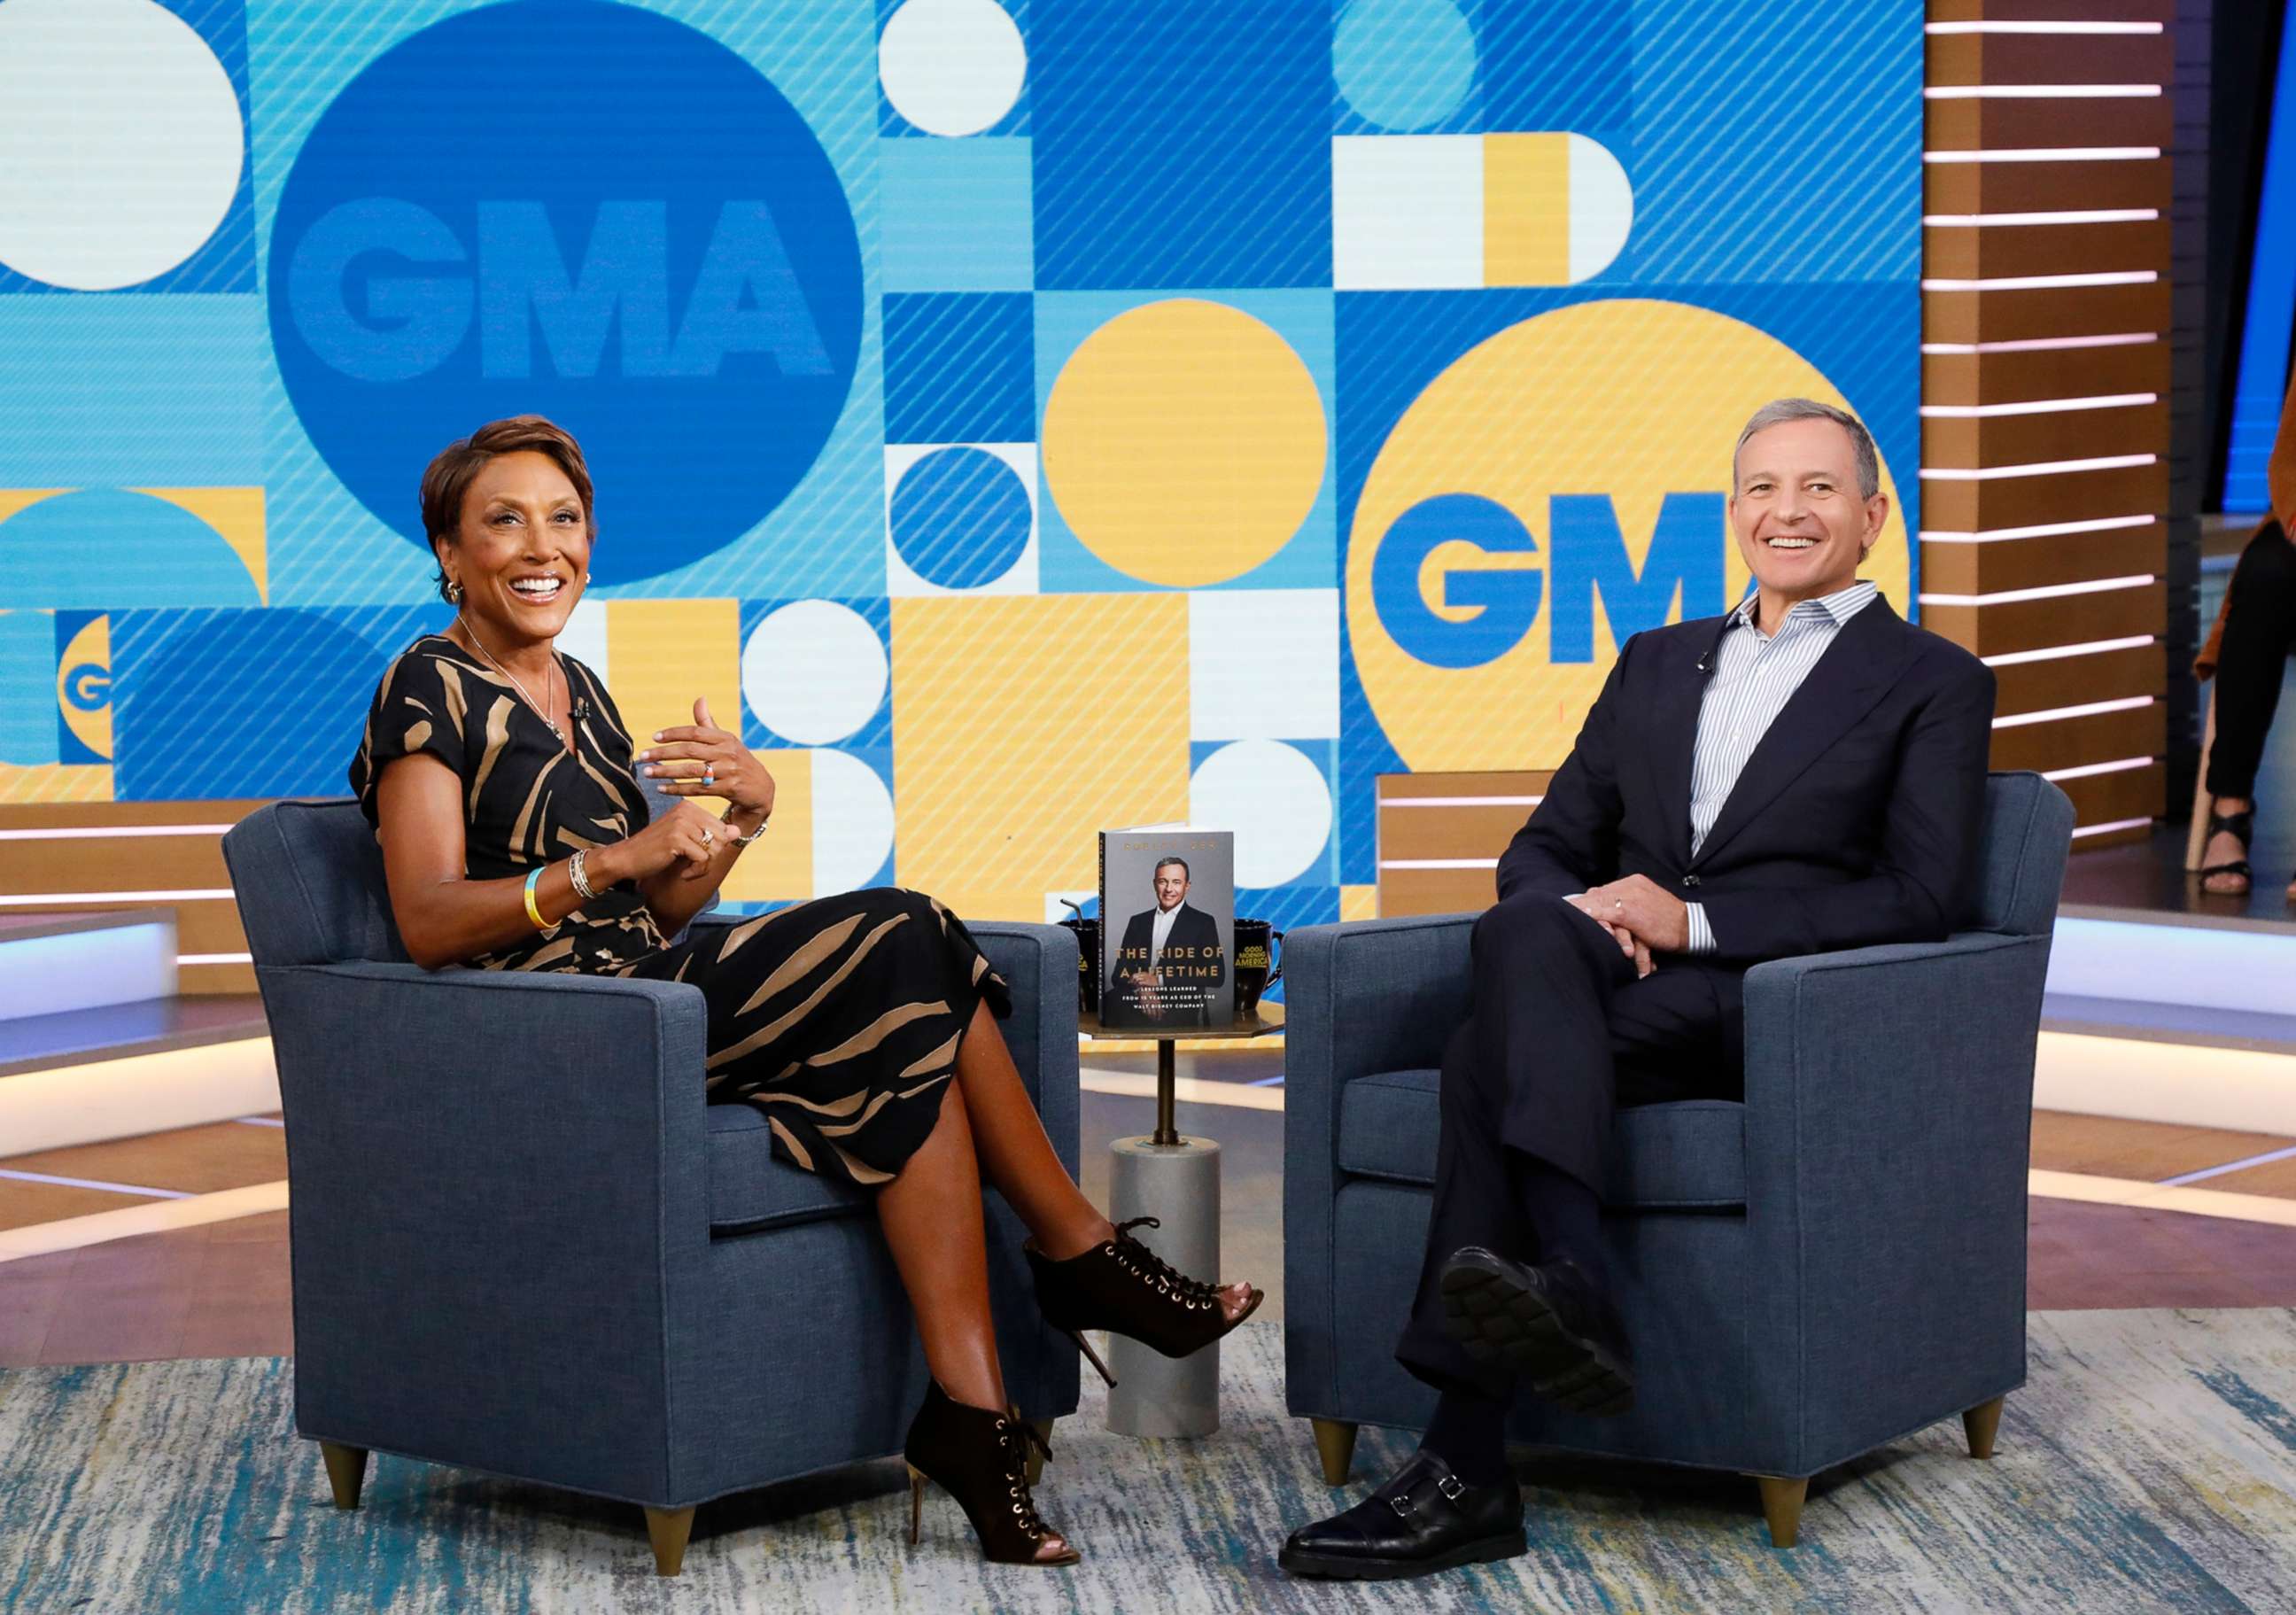 PHOTO: Chairman and Chief Executive Officer of the Walt Disney Company Bob Iger is a guest on "Good Morning America," September 23, 2019, on the Walt Disney Television Network.